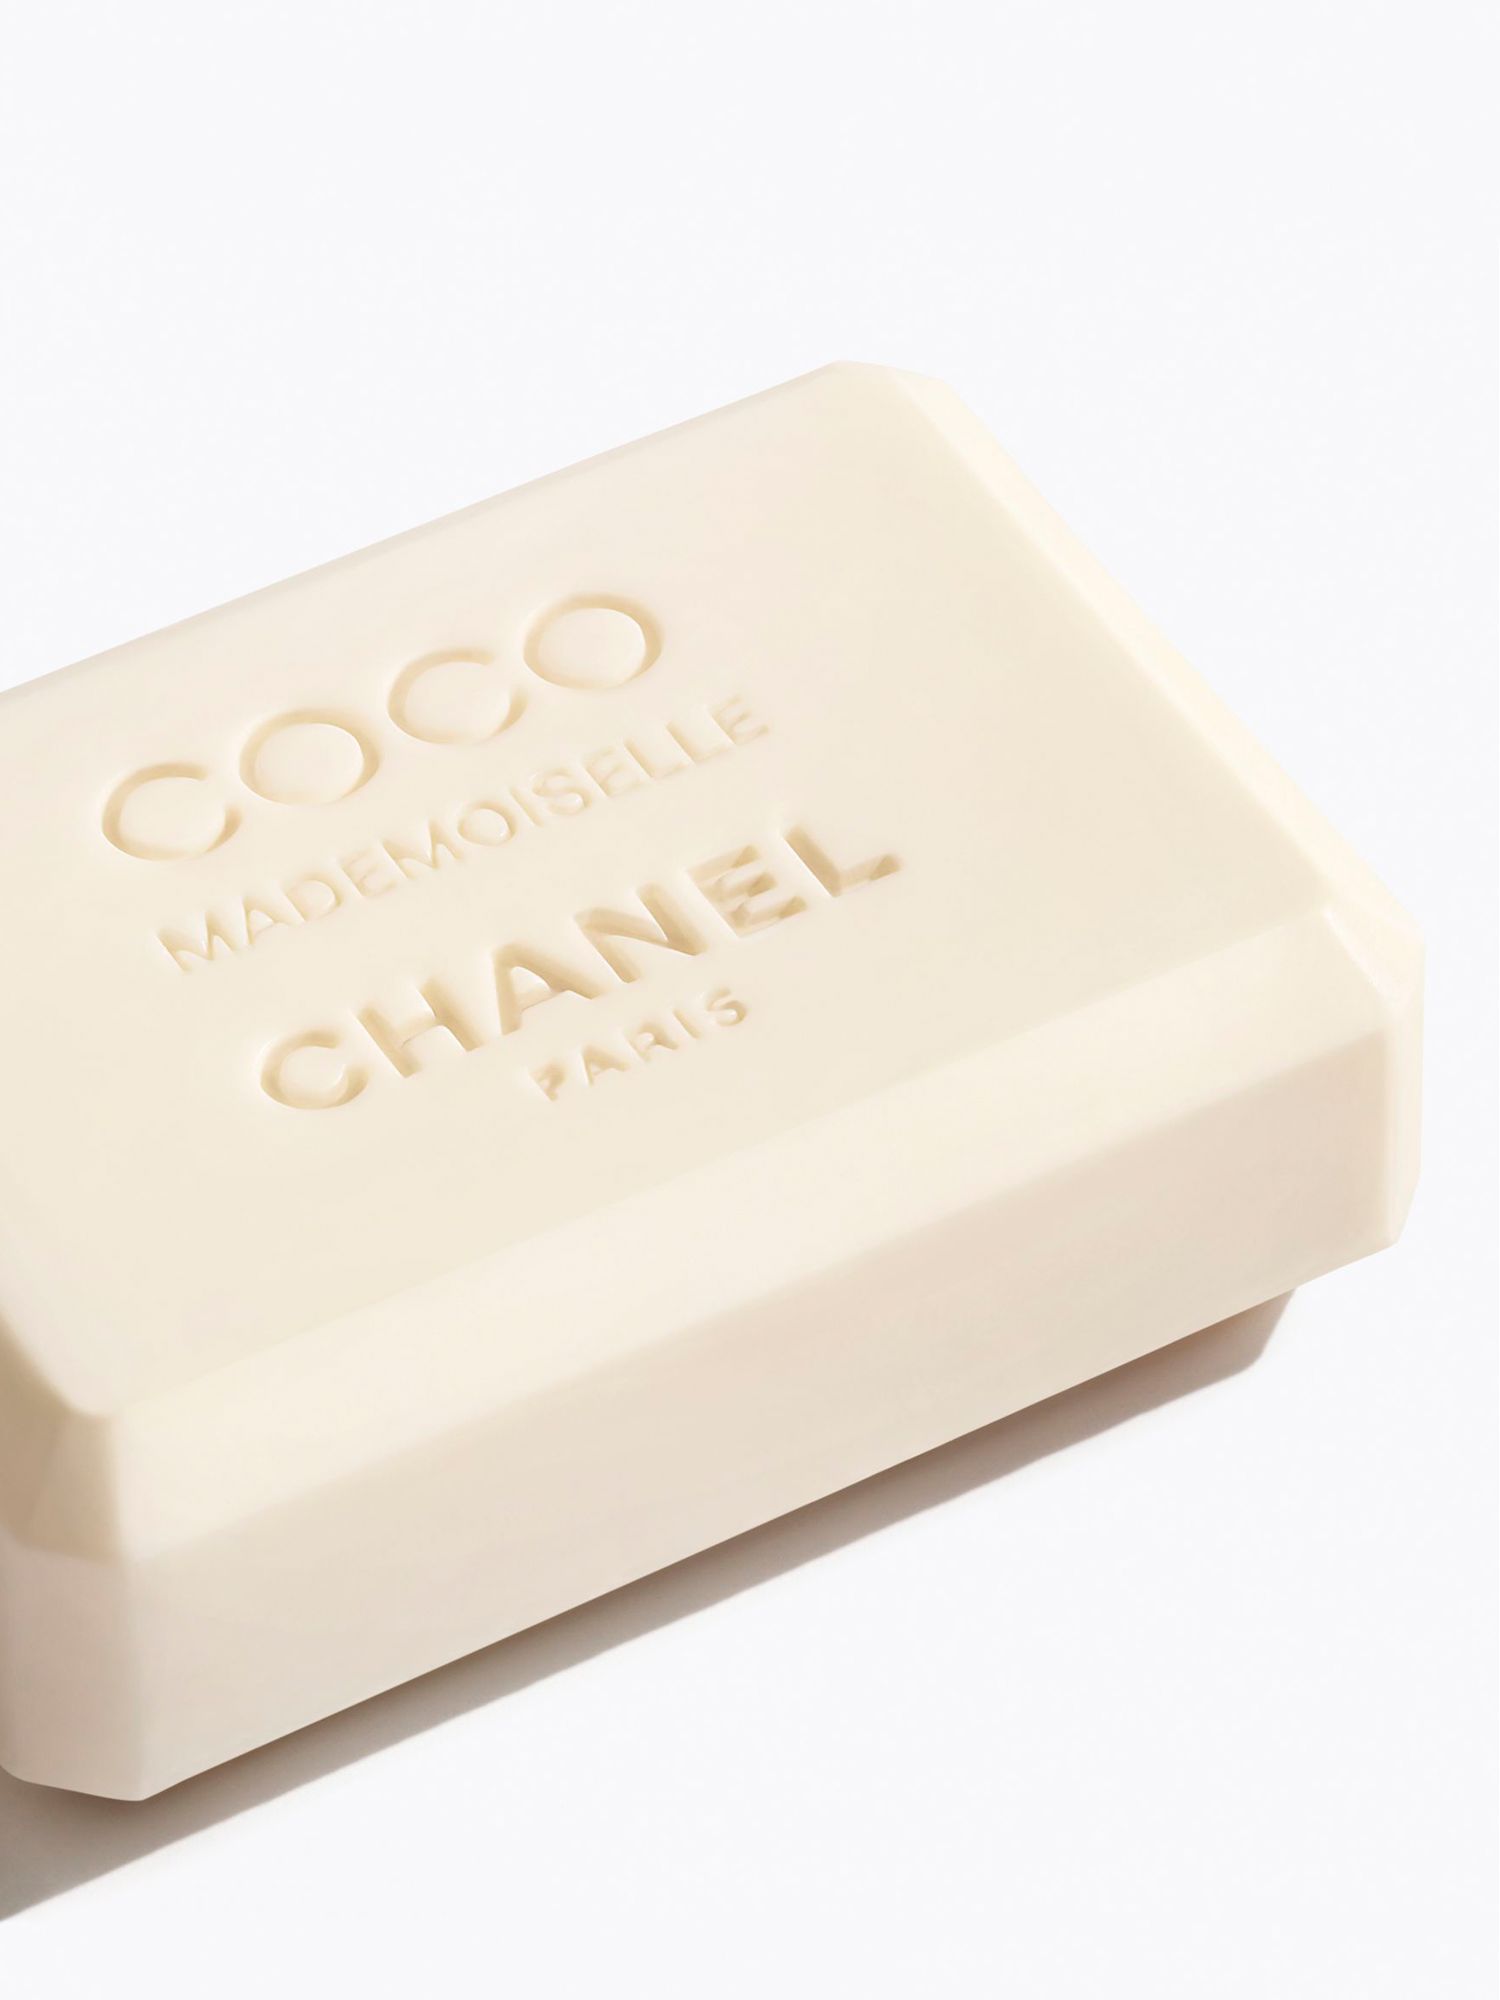 CHANEL Coco Mademoiselle Gentle Perfumed Soap, 100g at John Lewis &  Partners